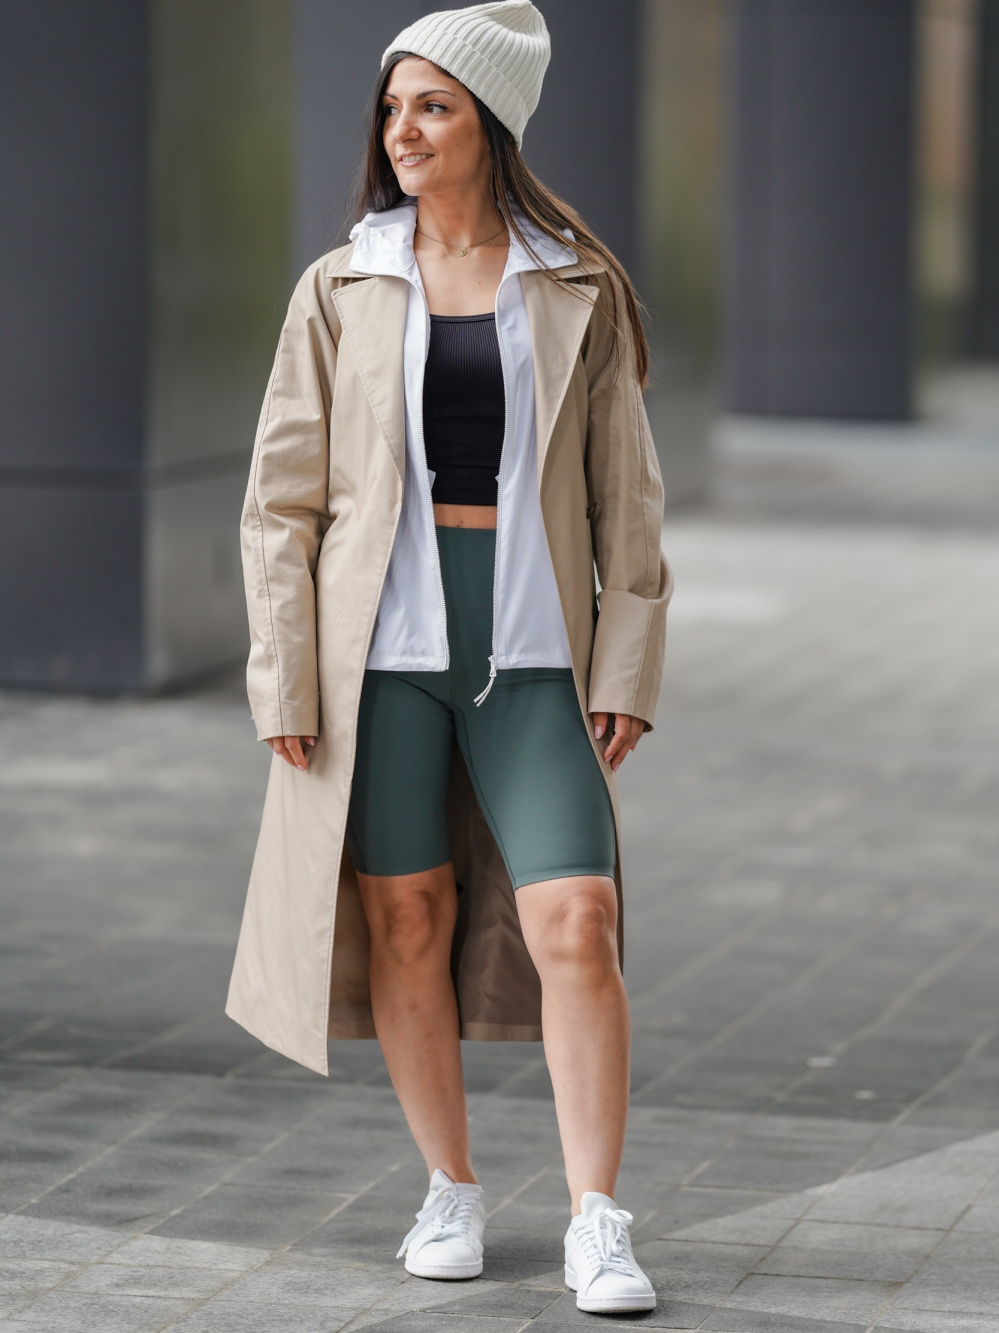 Check styling ideas for「TRENCH COAT、AIRISM SOFT ACTIVE BIKER SHORTS (10  INCH)」